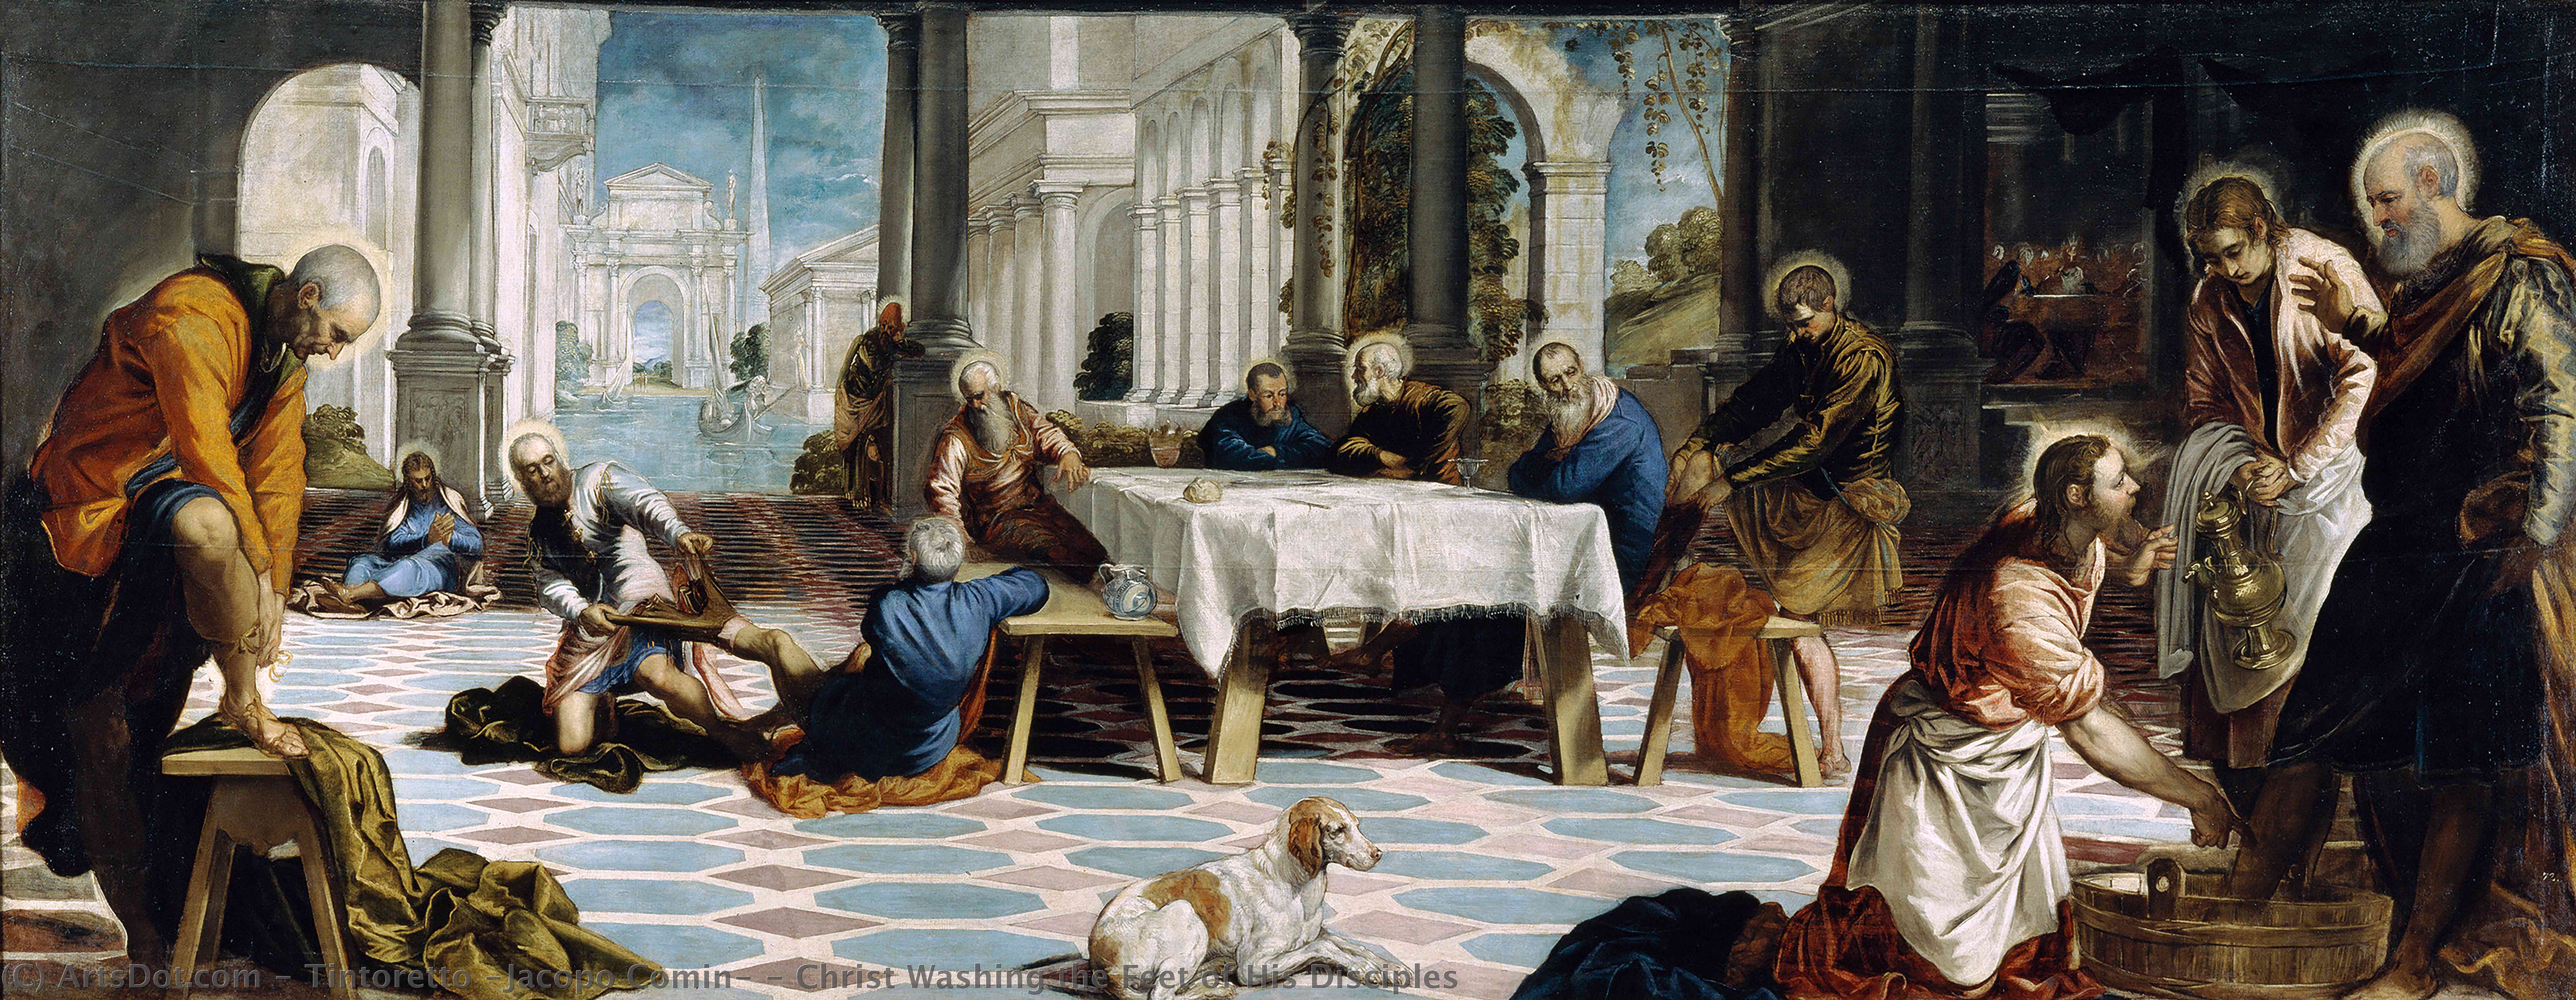 Wikioo.org - สารานุกรมวิจิตรศิลป์ - จิตรกรรม Tintoretto (Jacopo Comin) - Christ Washing the Feet of His Disciples